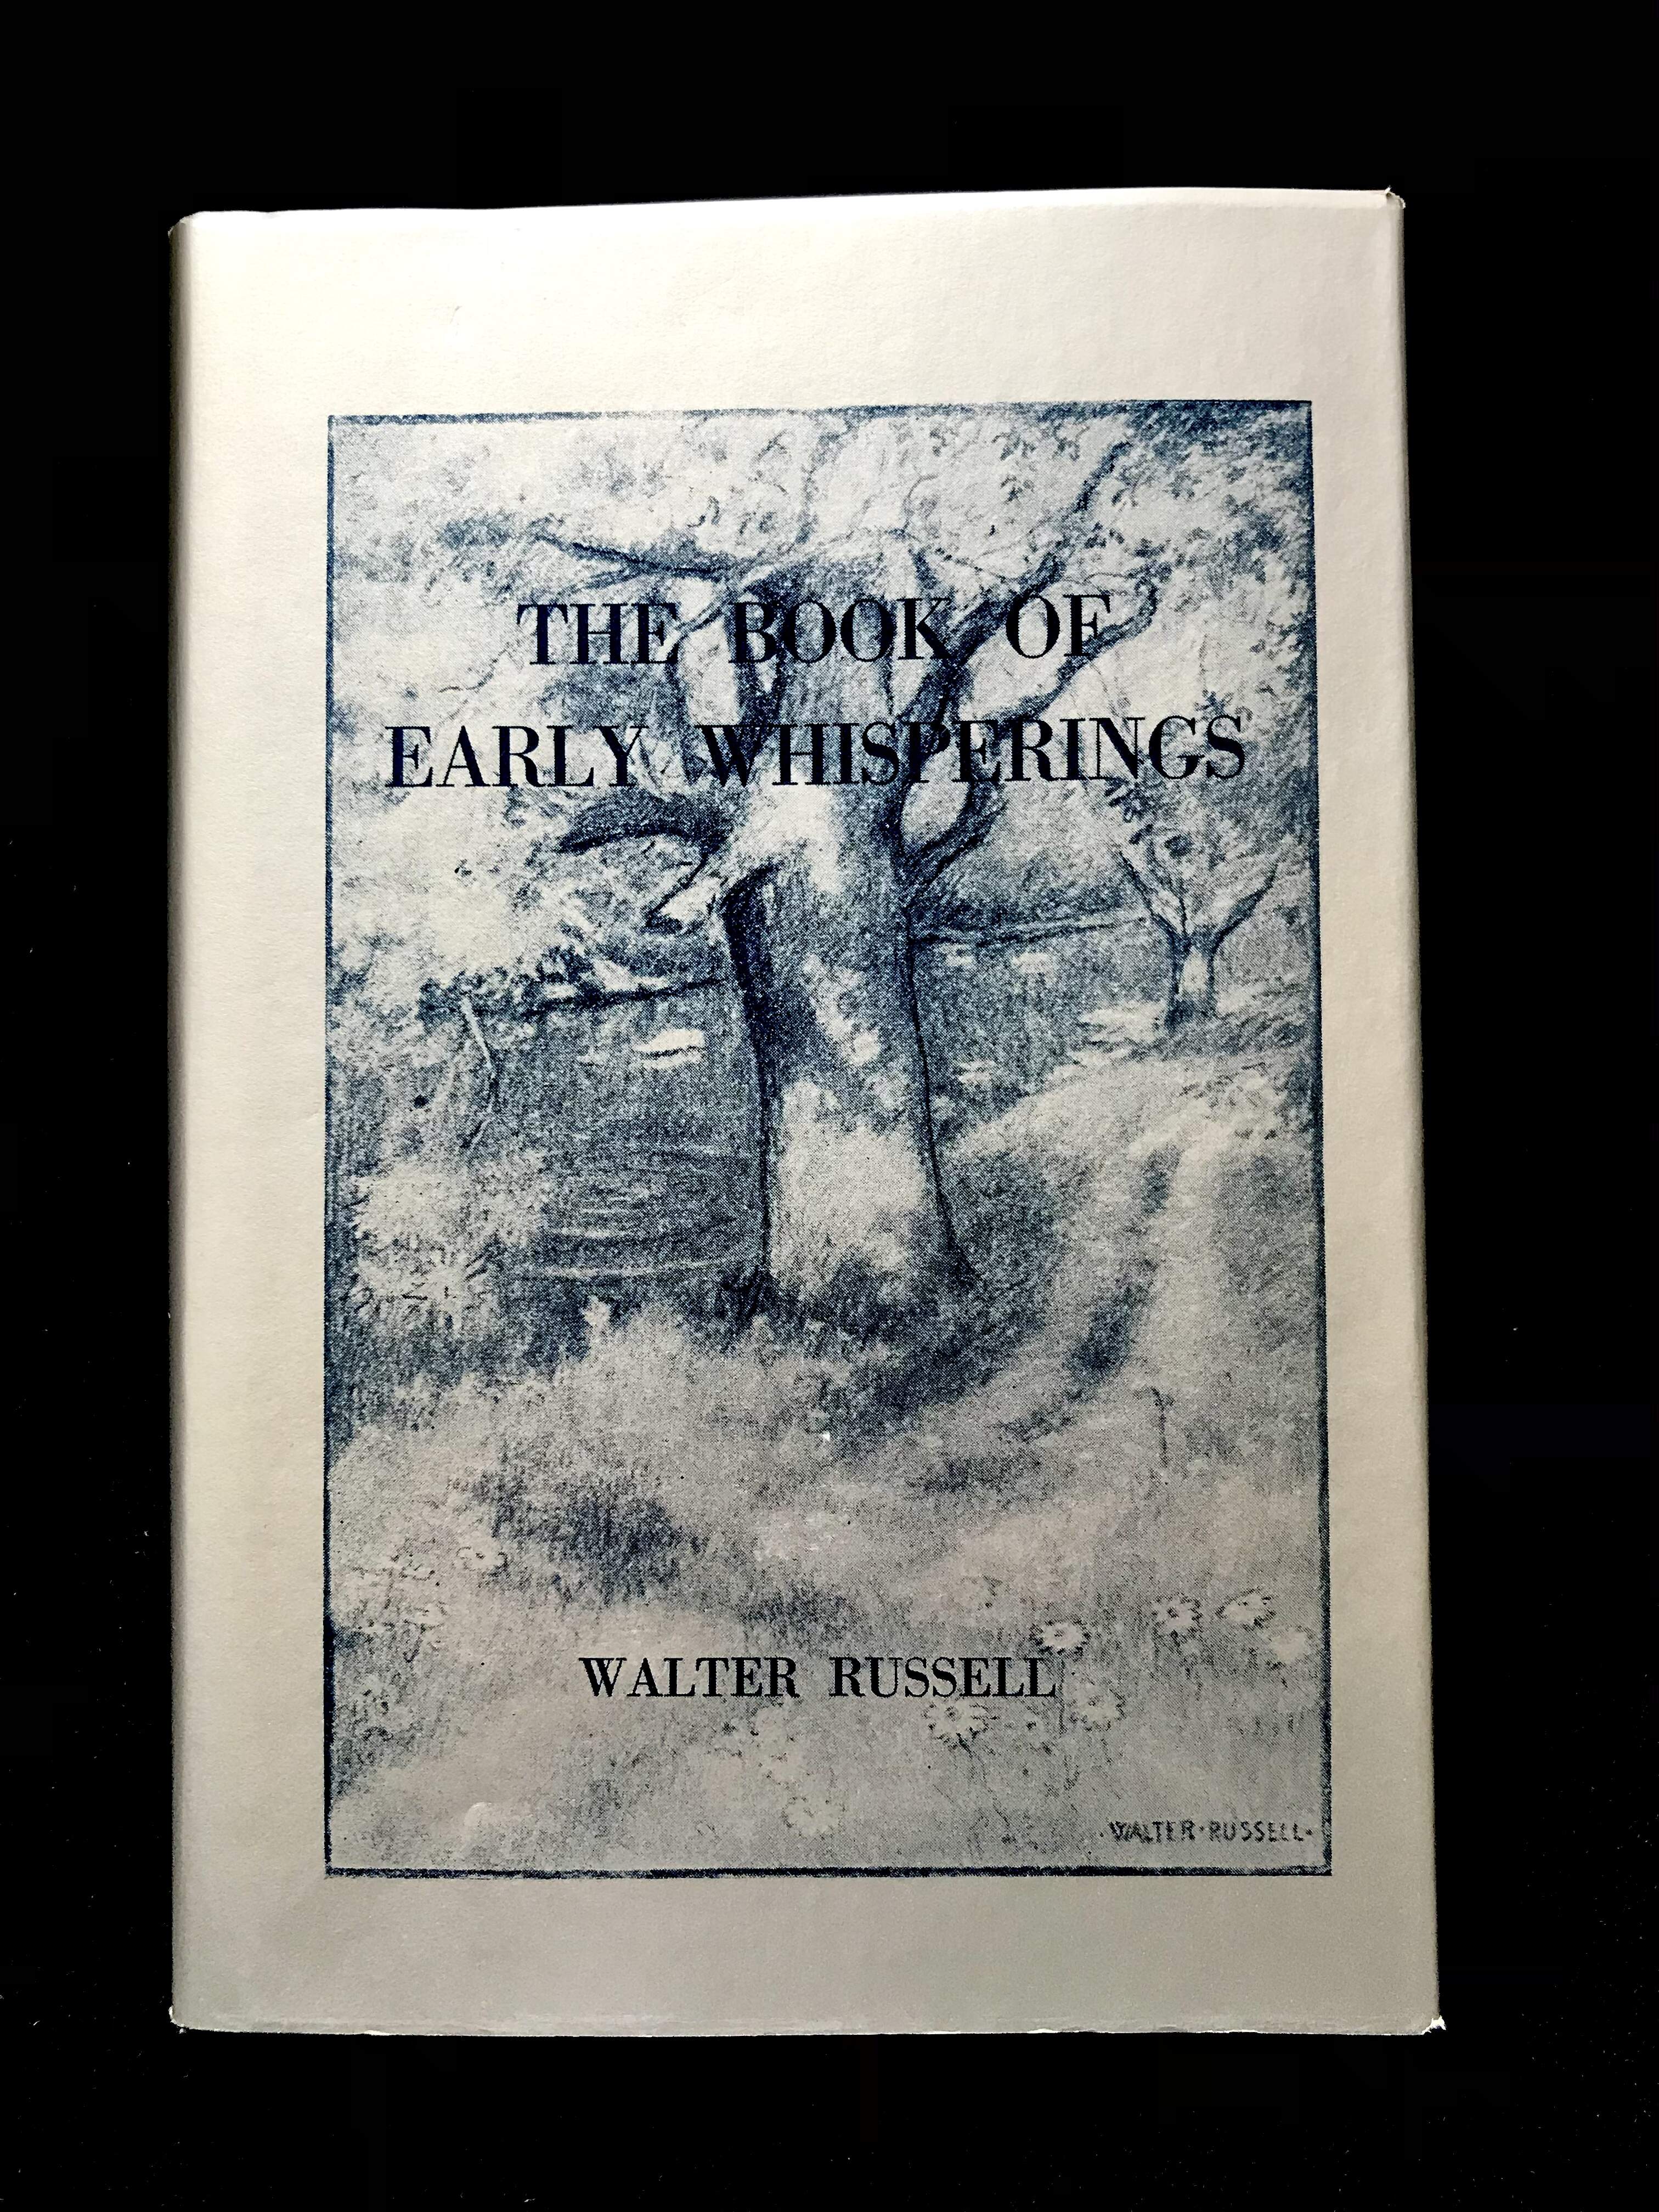 The Book of Early Whisperings by Walter Russel